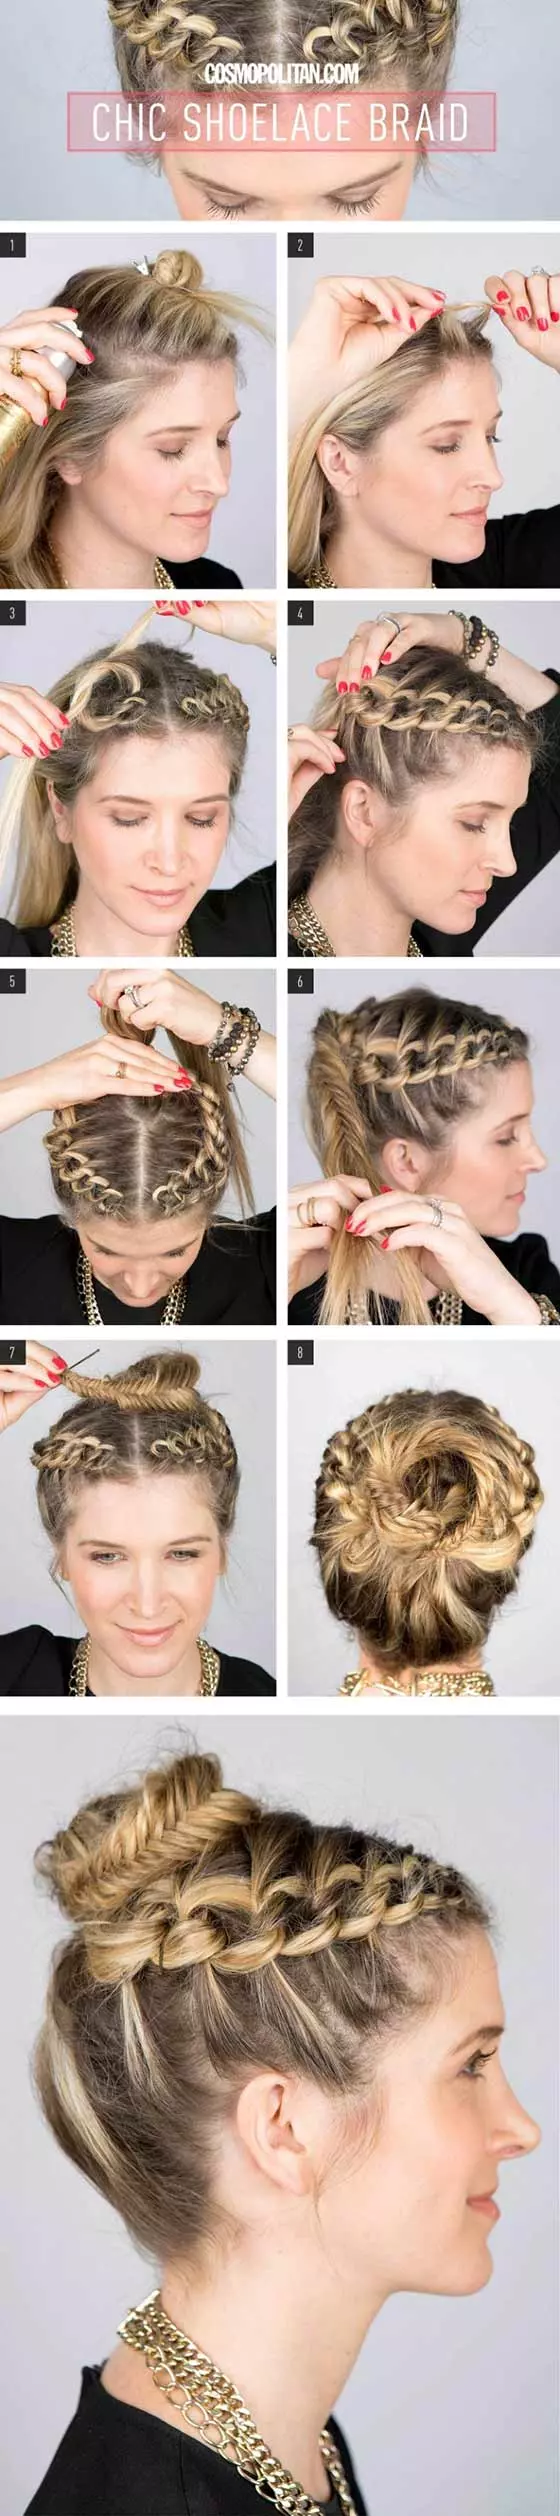 Chic shoelace braided hairstyle for long hair